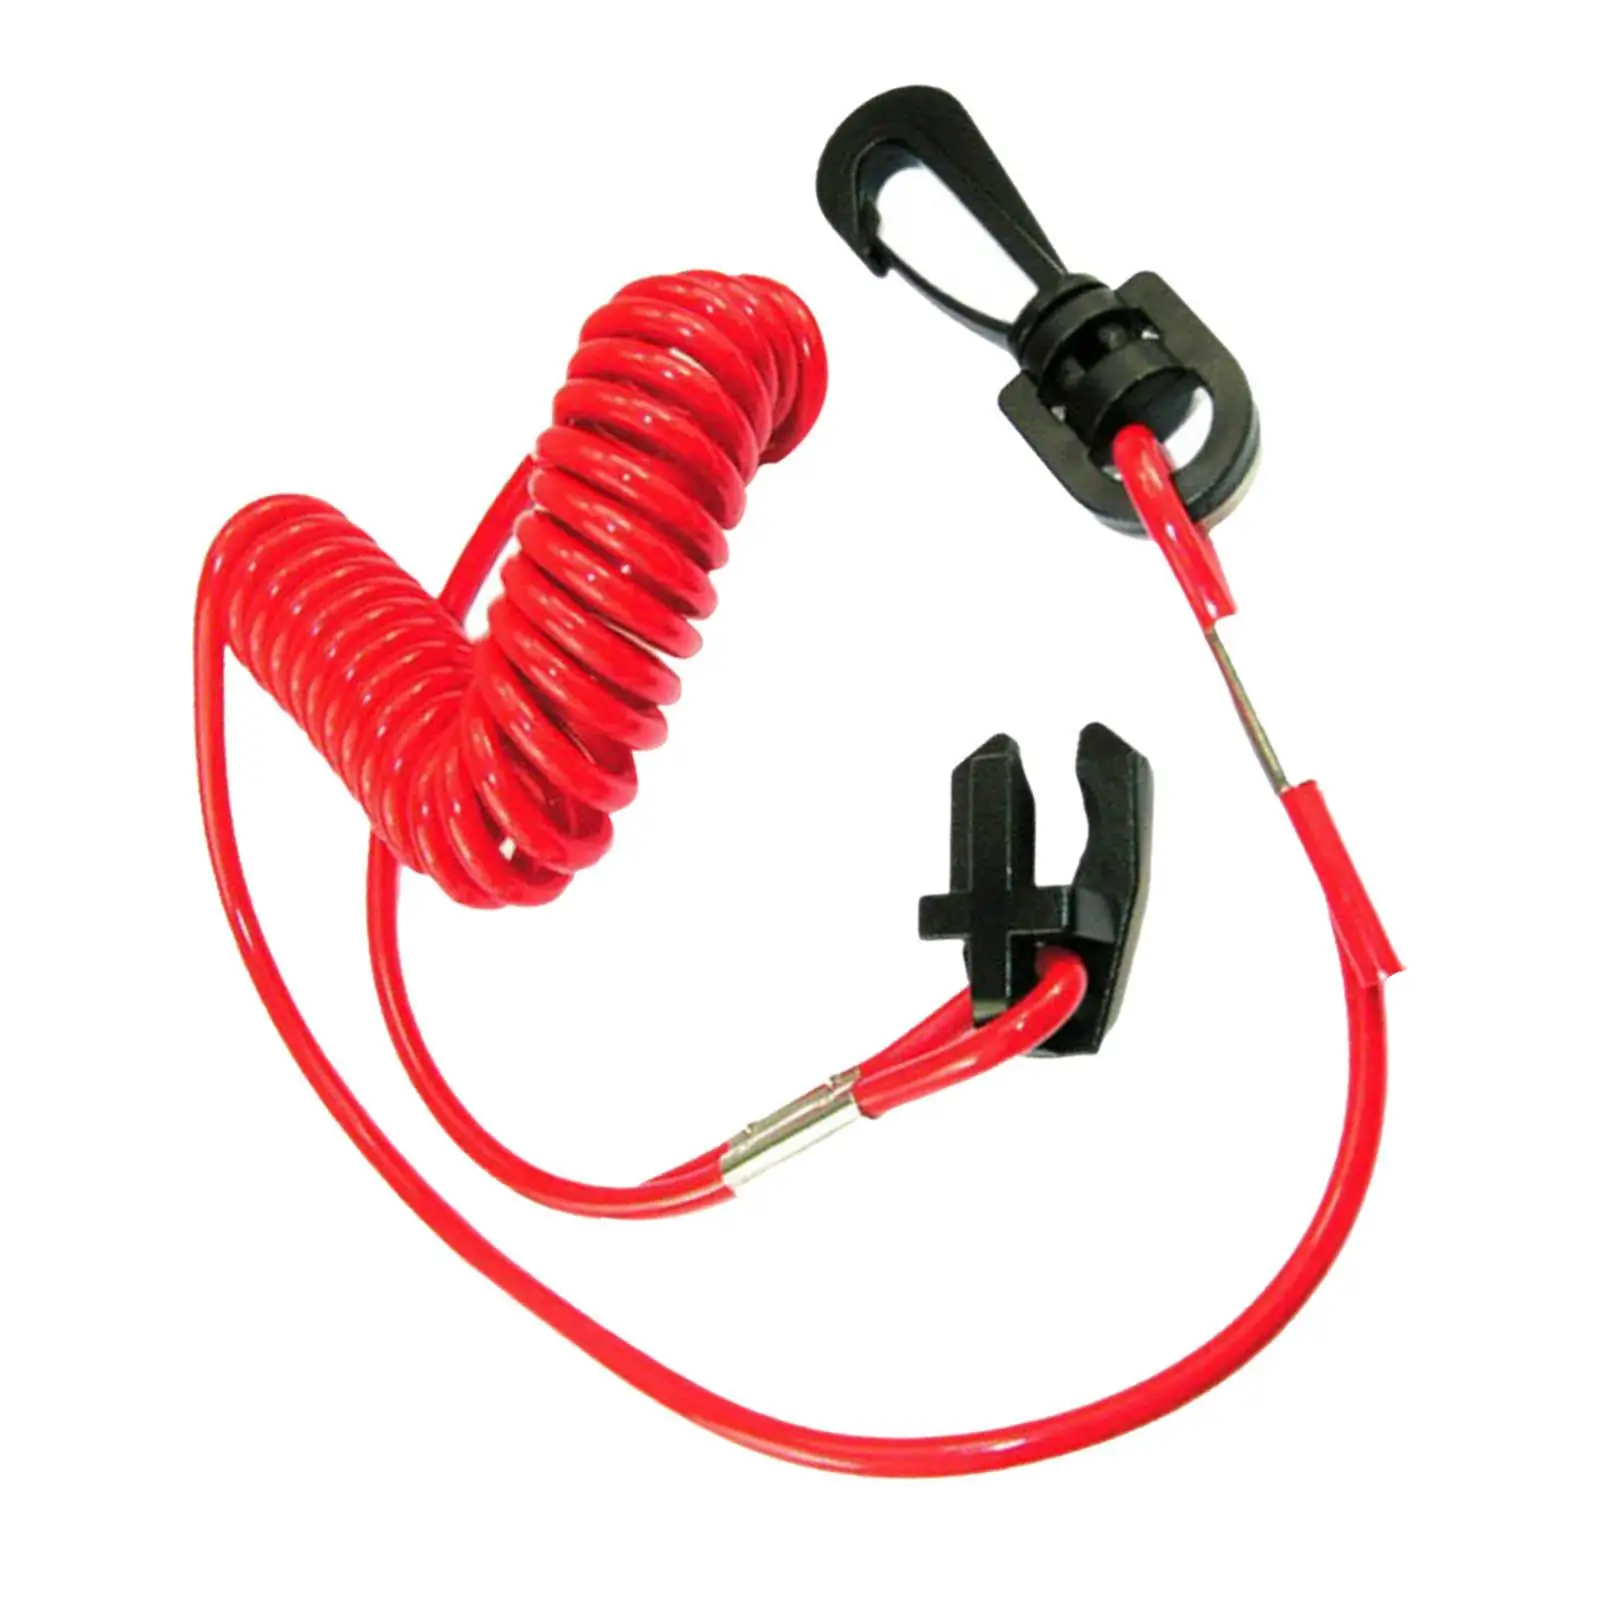 Boat Safety Kill Stop Switch Lanyard, Safety Tether Cord Red Fit for for Evinrude for Omc for Johnson Stop Switch Lanyard Boat